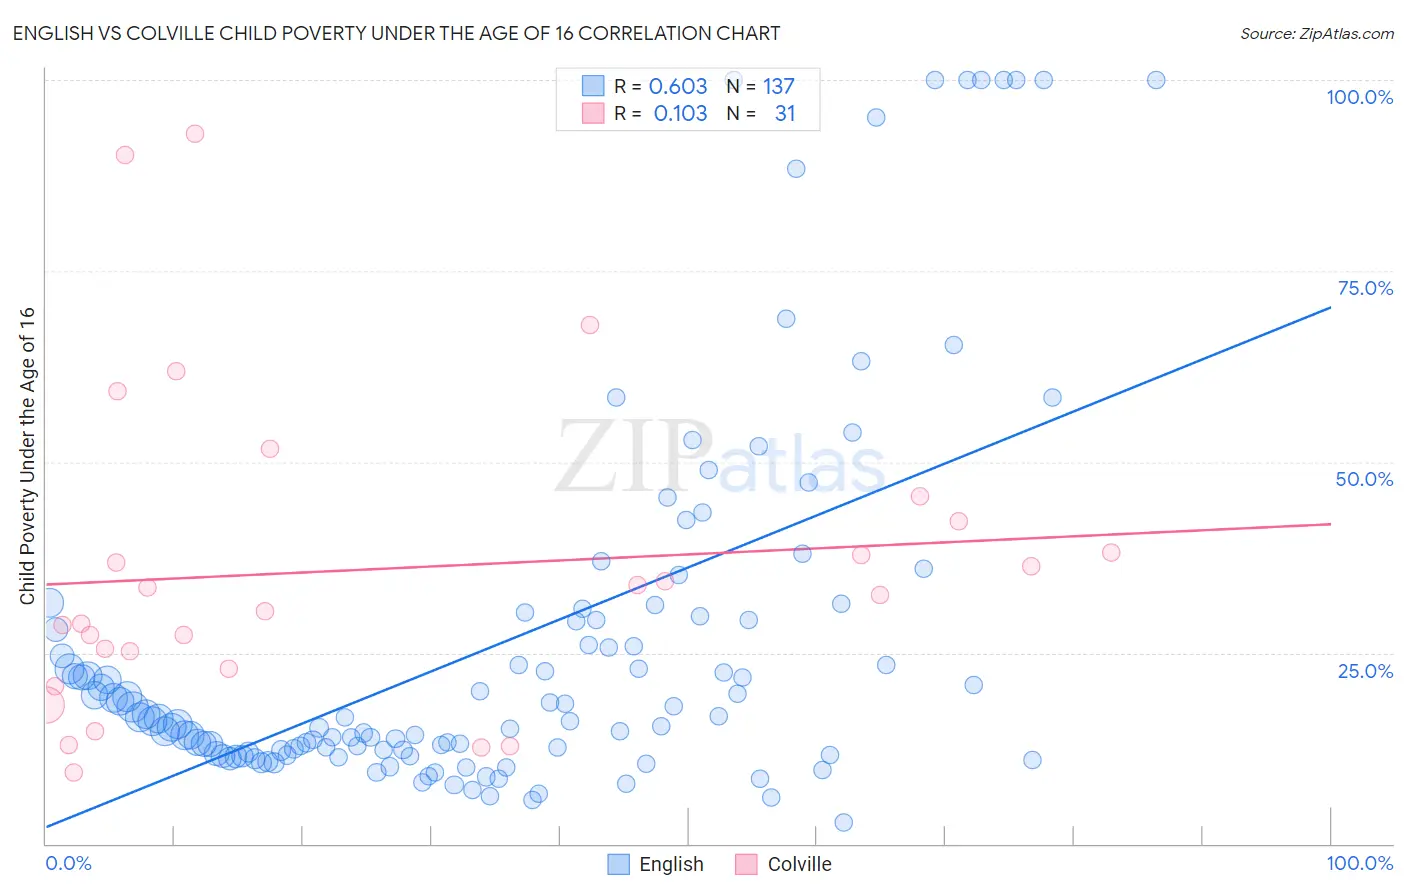 English vs Colville Child Poverty Under the Age of 16